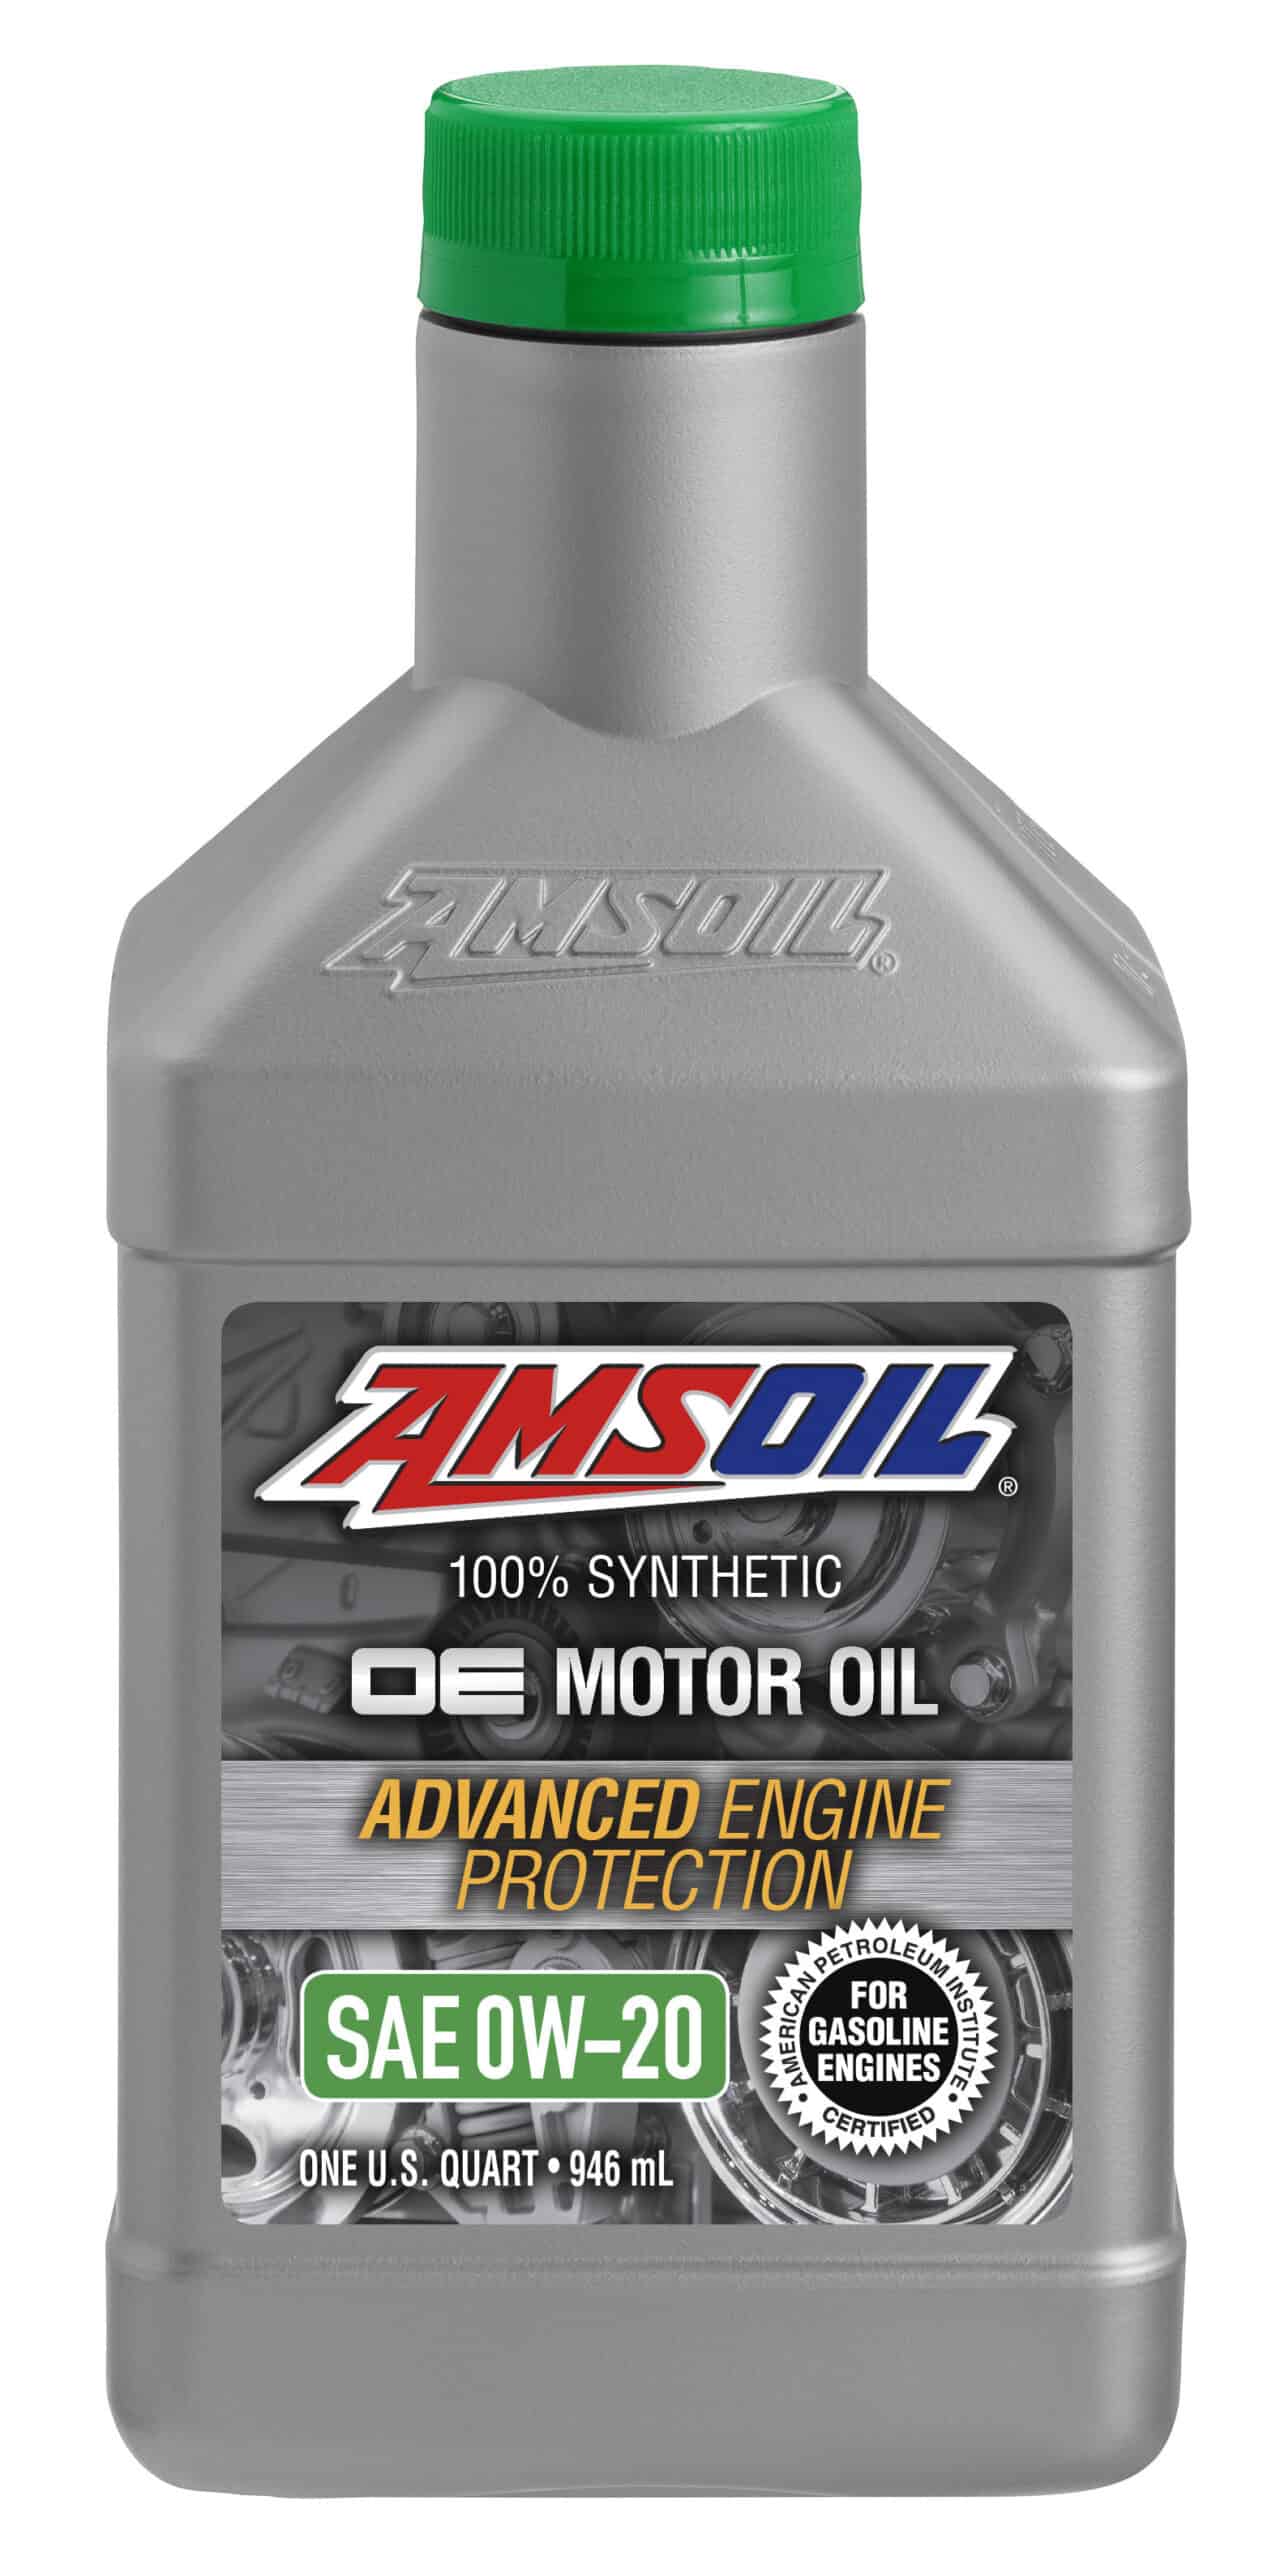 A bottle of AMSOIL OE Synthetic Motor Oil, formulated for mechanics and drivers seeking peace of mind protection and exceptional value in synthetic motor oil.